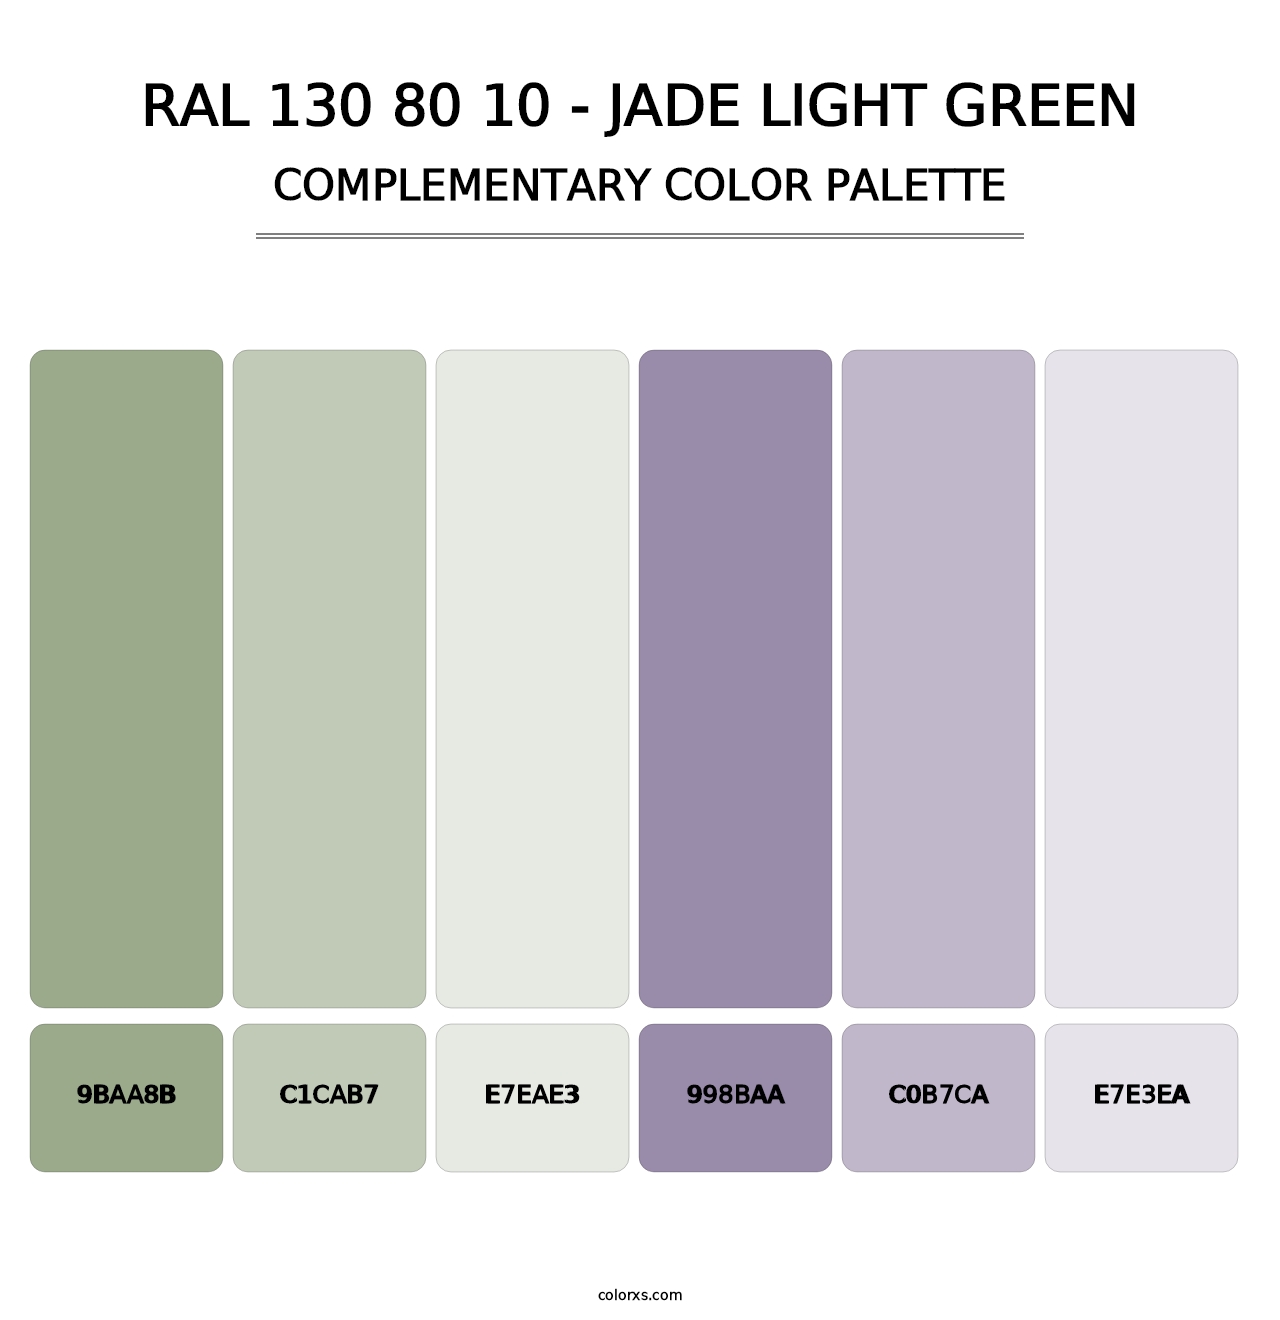 RAL 130 80 10 - Jade Light Green - Complementary Color Palette